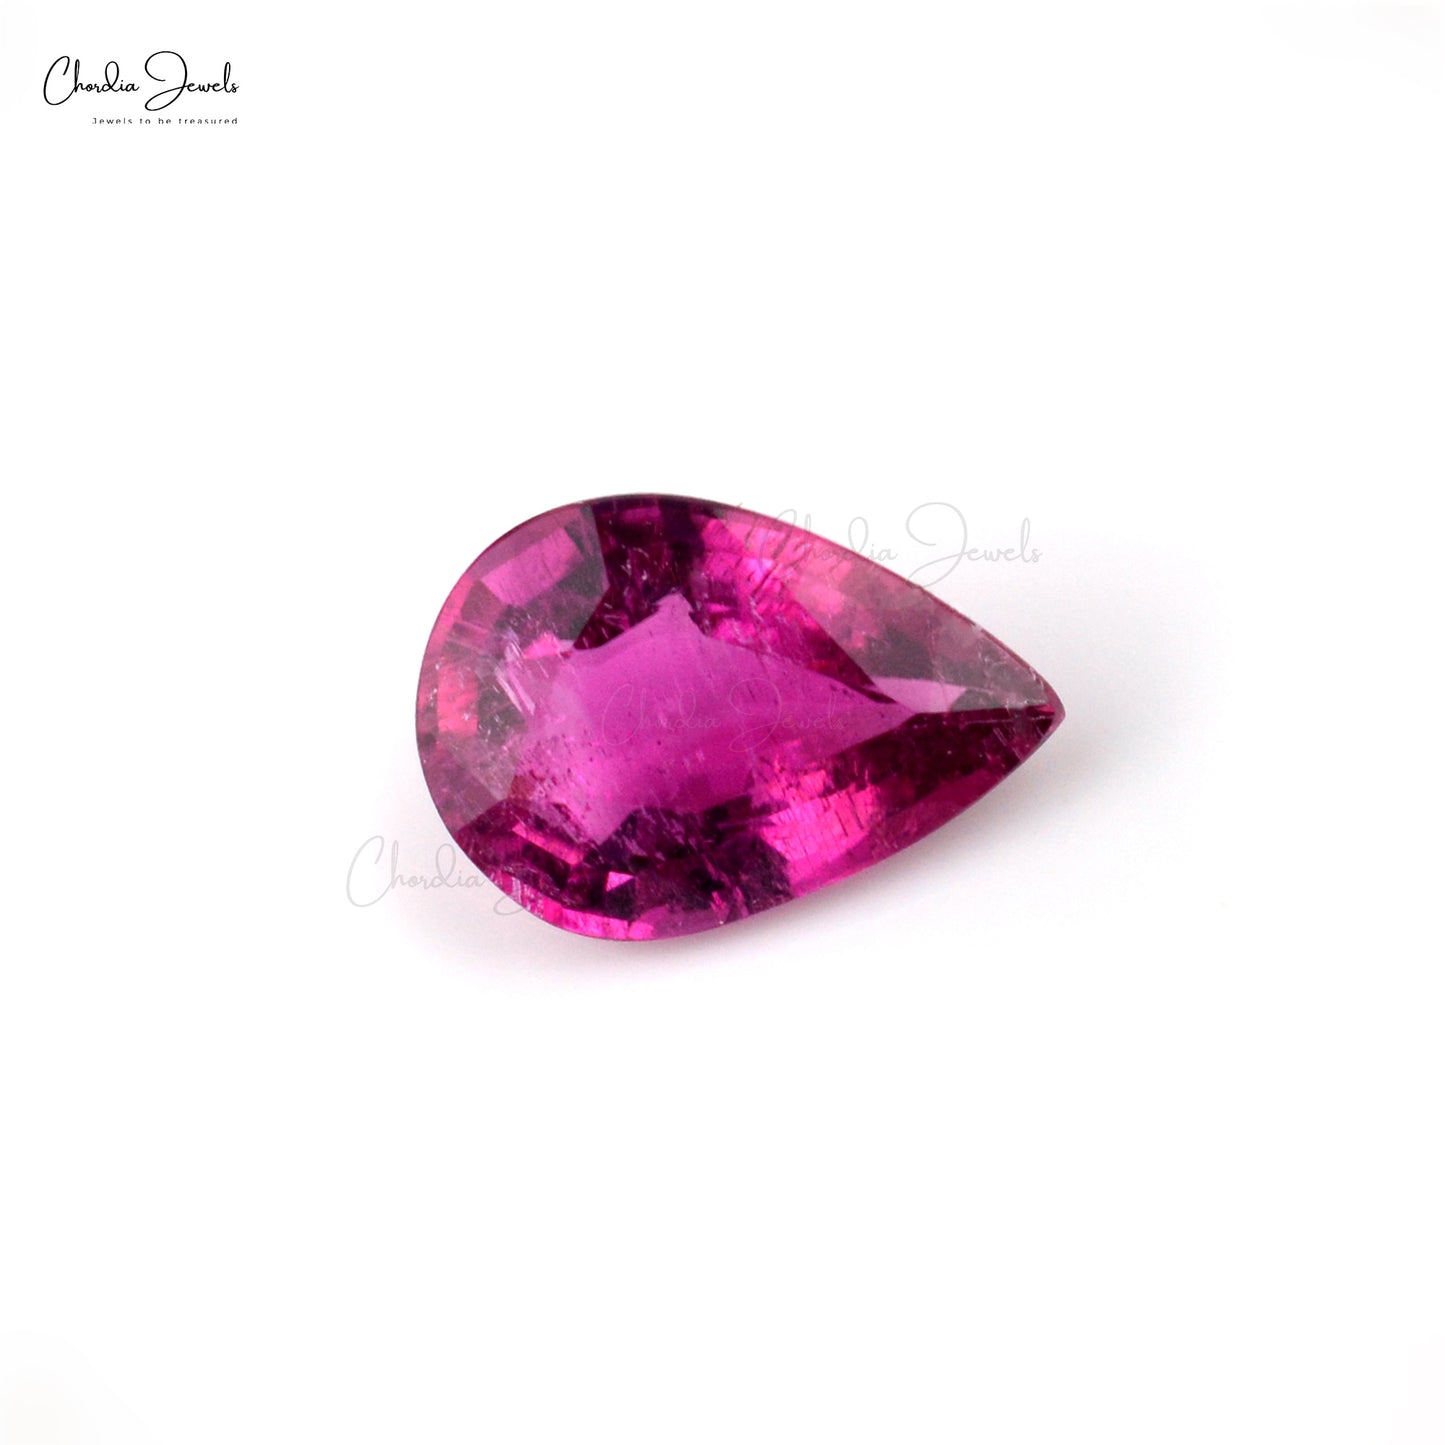 Load image into Gallery viewer, 1.45 carat Super Fine Quality Rubellite Tourmaline Pear Cut Gemstone for Making Necklaces, 1 Piece
